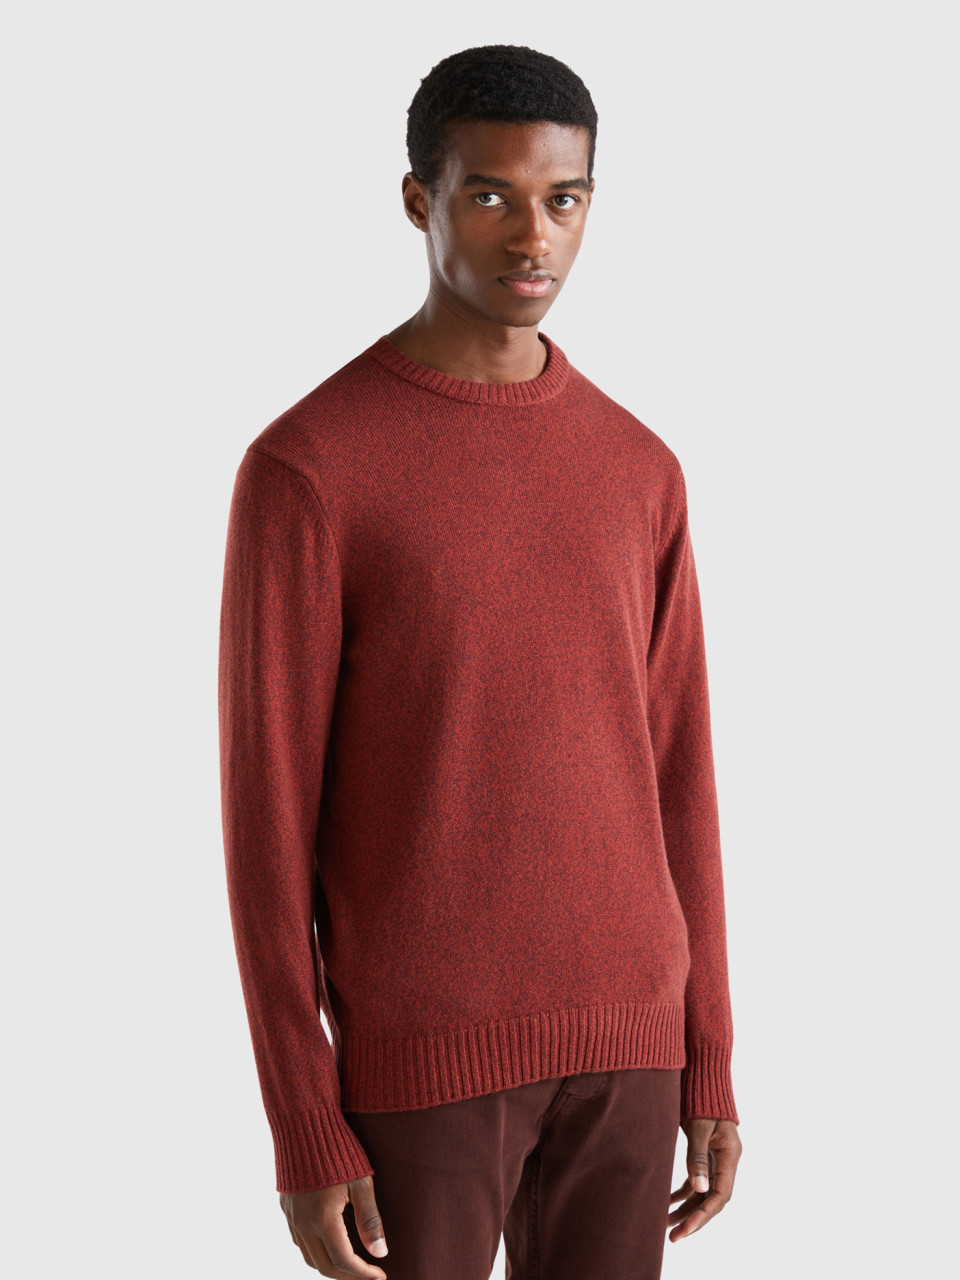 Benetton, Crew Neck Sweater In Cashmere And Wool Blend, Red, Men